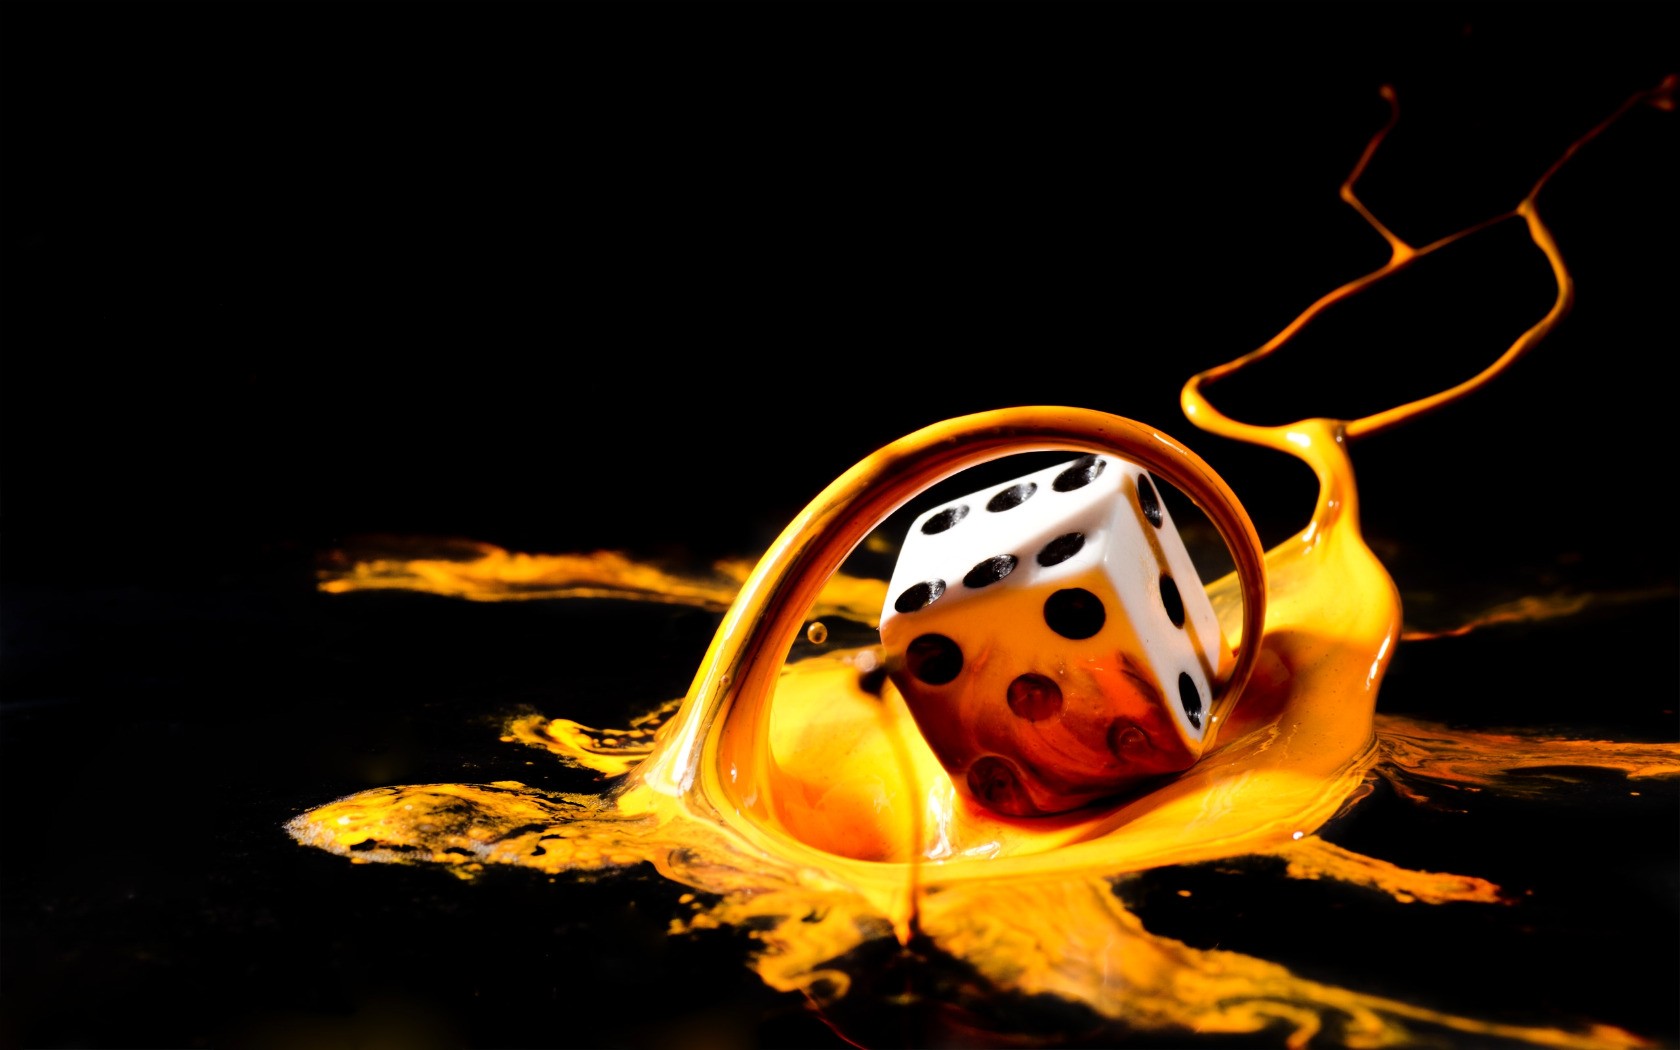 General 1680x1050 dice artwork simple background yellow black background